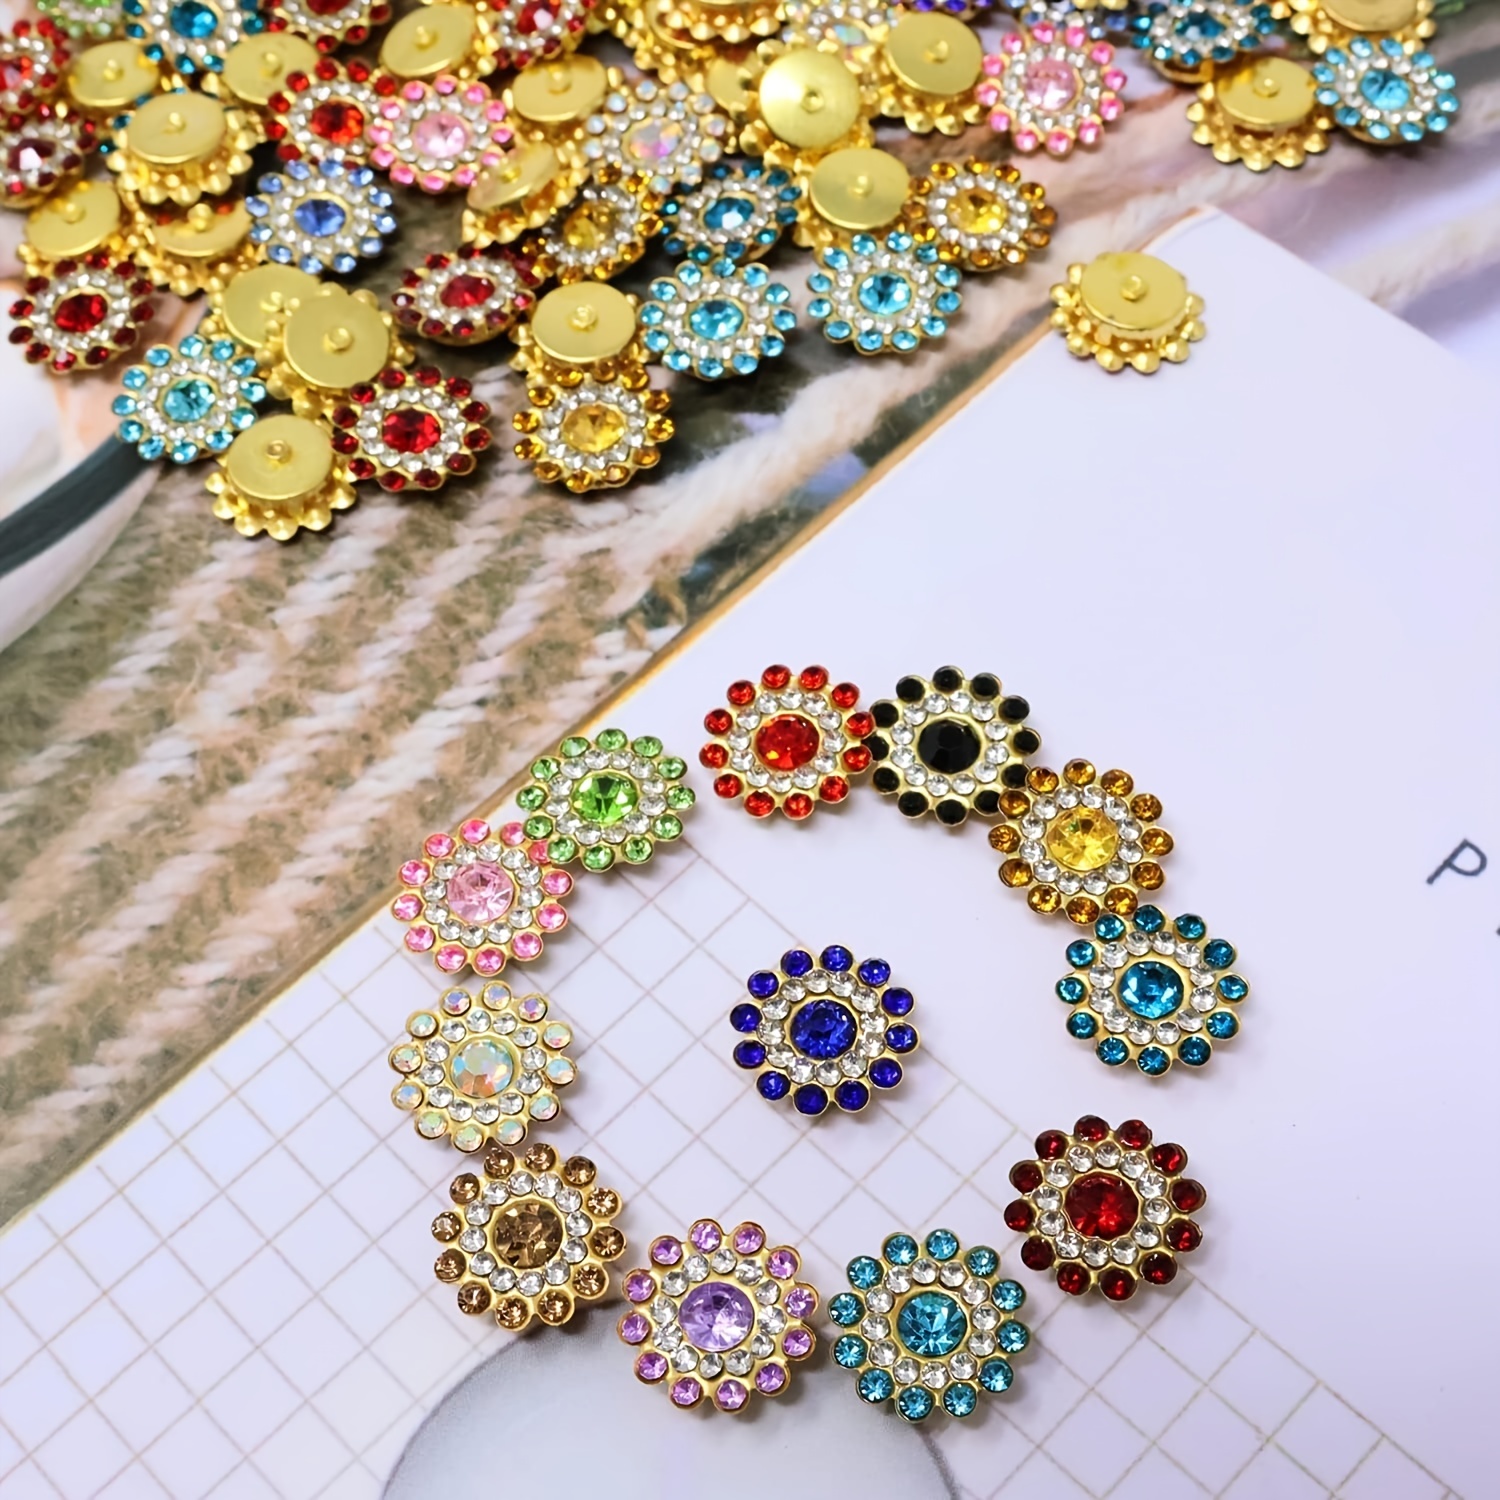 Rhinestone Buttons Crafts, Buttons Flowers Crystal Diy